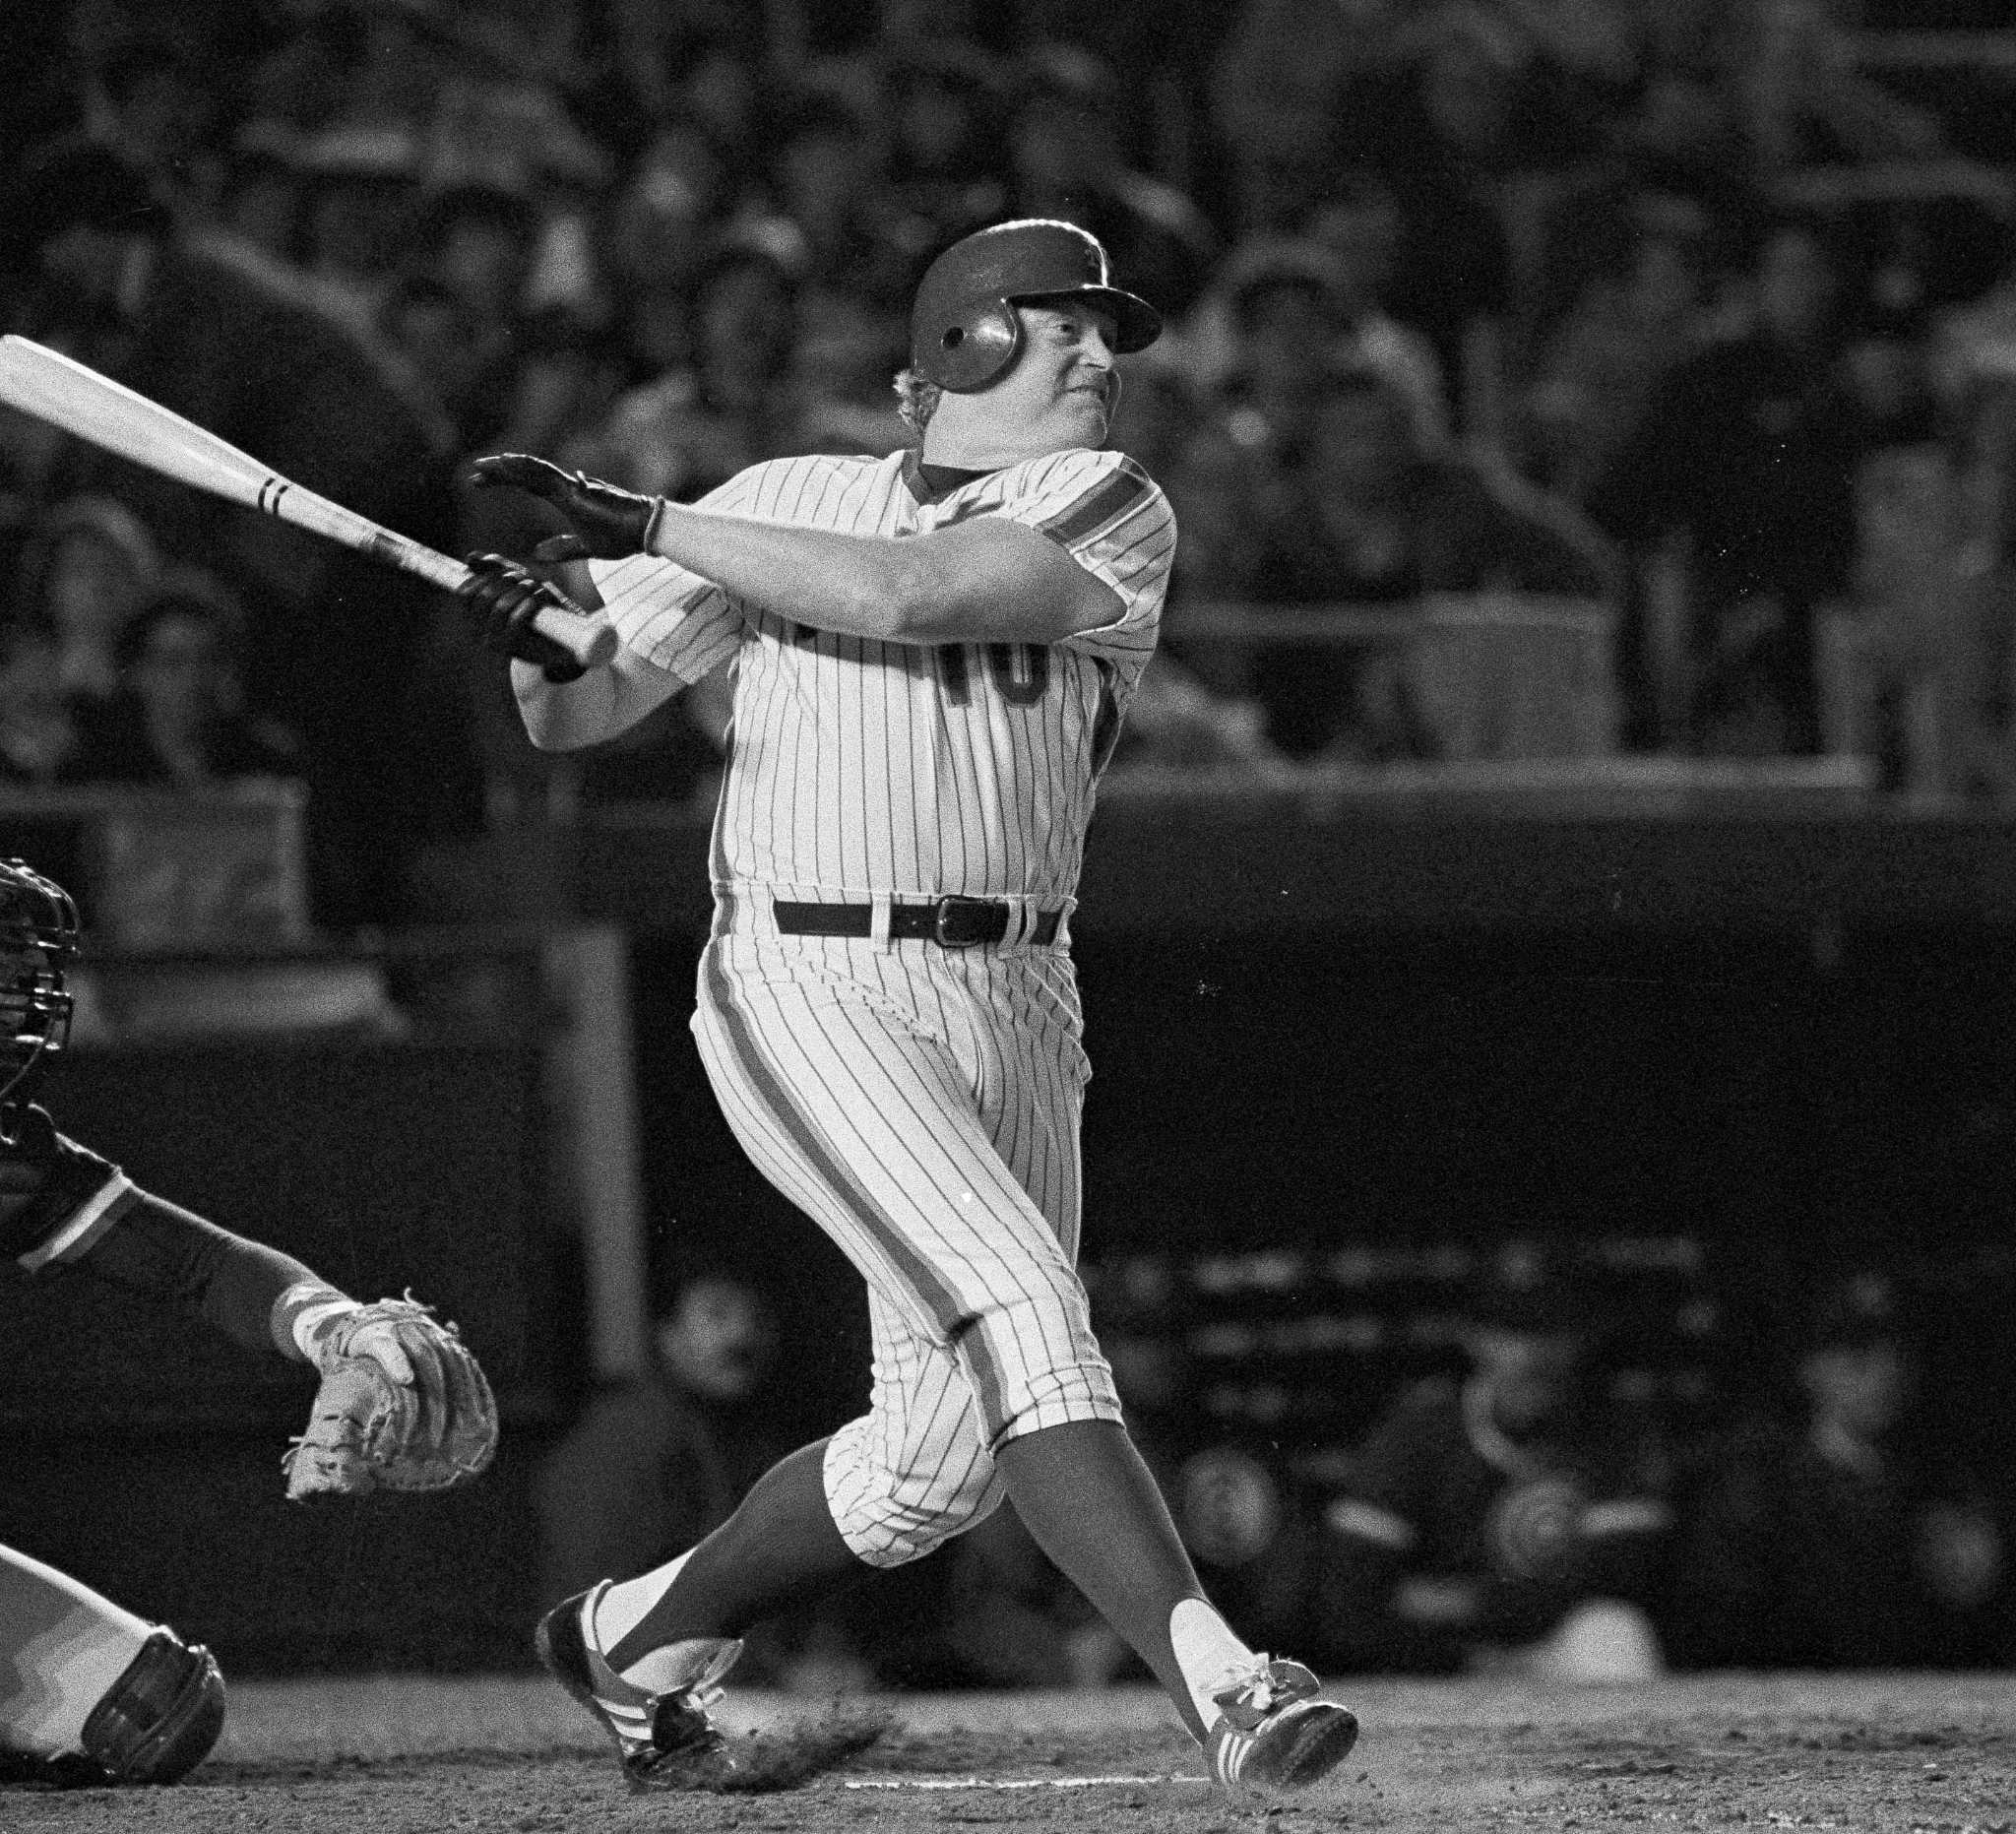 Rusty Staub, beloved Mets slugger who broke into majors with Colt  .45s/Astros, dies at 73